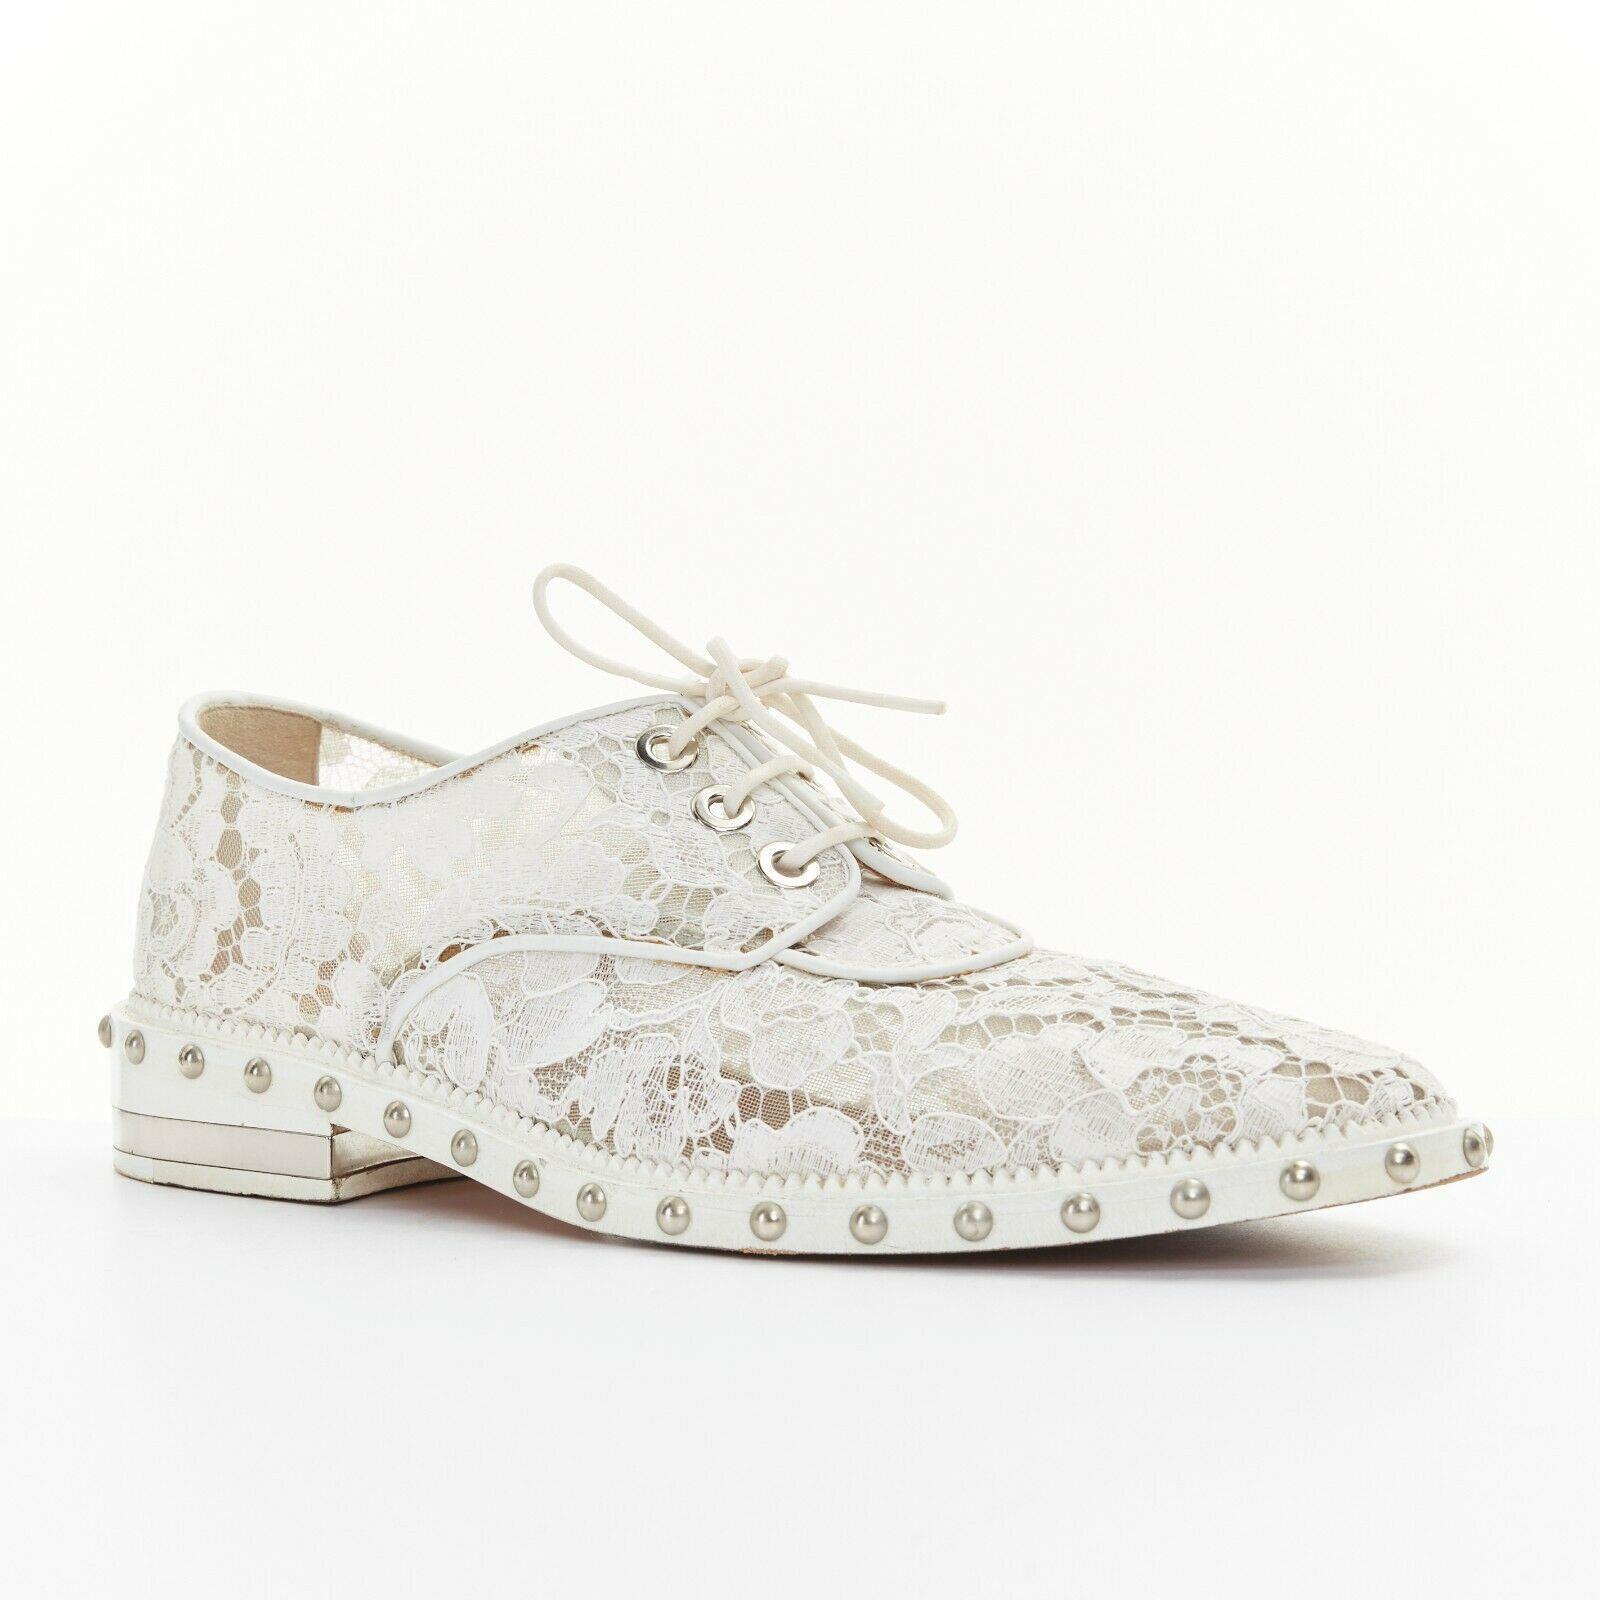 GIVENCHY TISCI white floral lace mesh silver stud outsole lace up brogue EU39

GIVENCHY BY RICCARDO TISCI
Black lace covered nude mesh upper. White leather piping. Silver-tone hardware. 
Lace up front. Almond round toe. Stacked wooden sole.